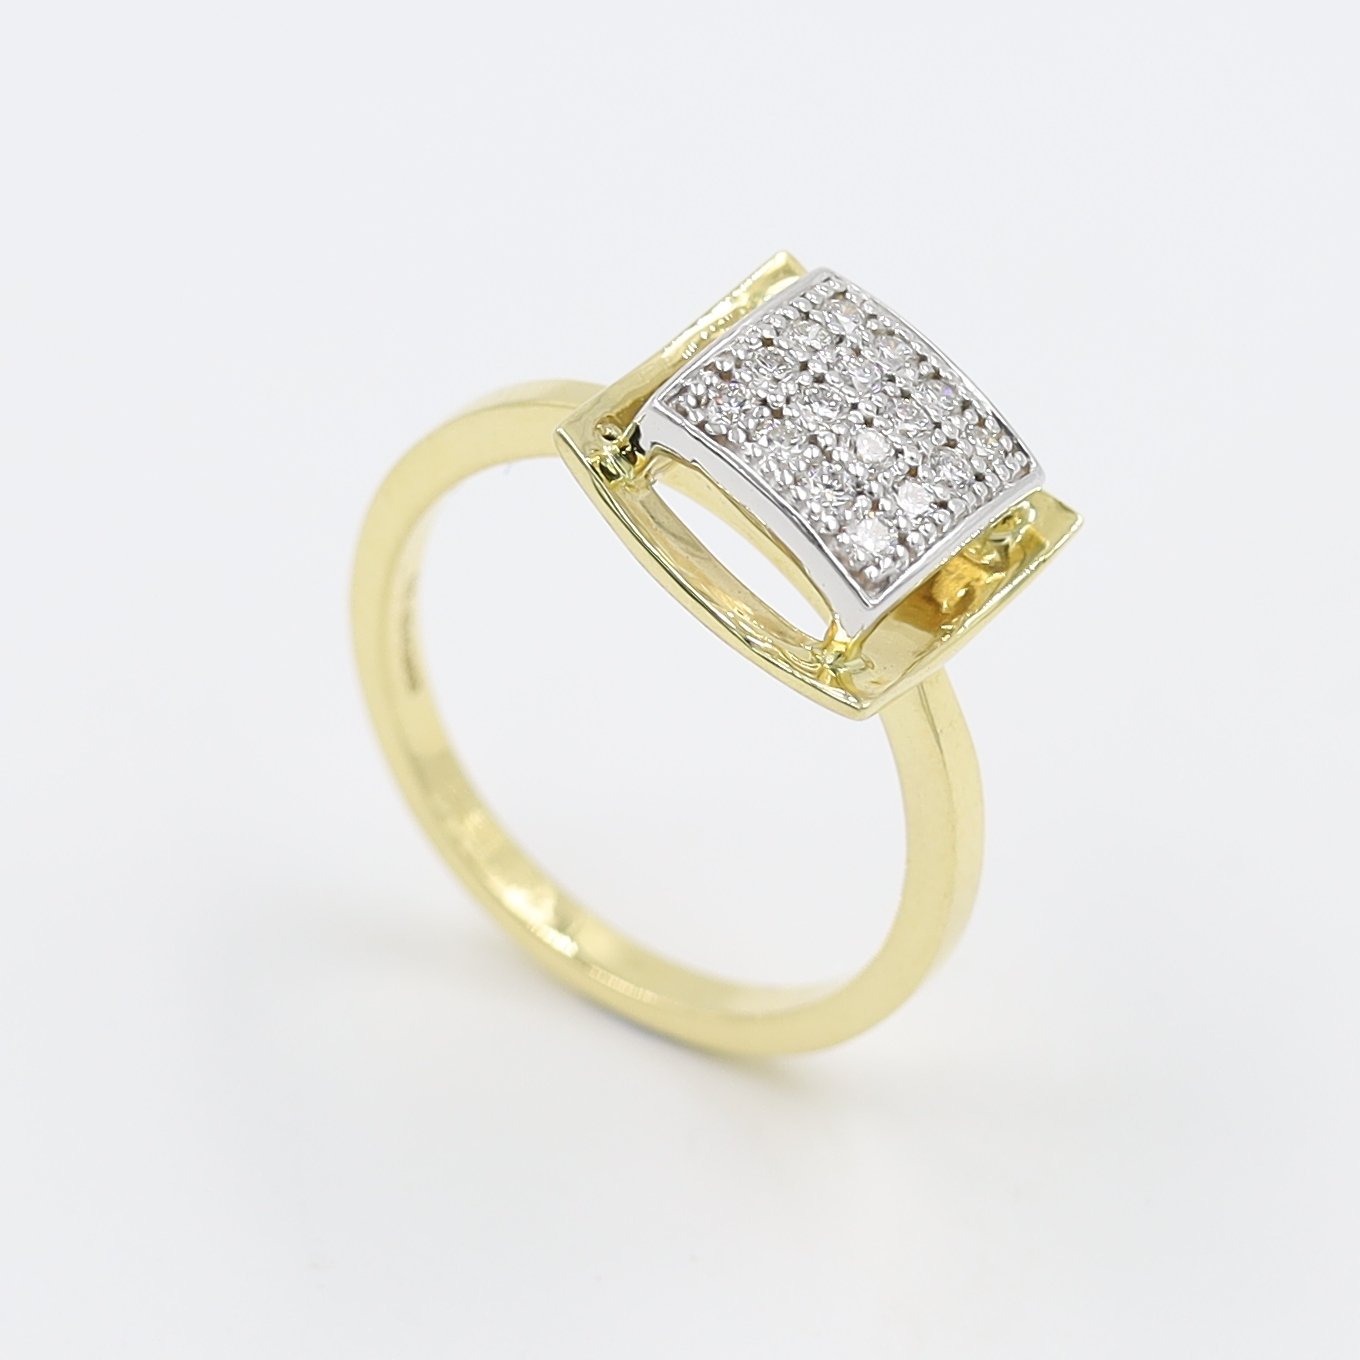 14Kt Yellow Gold Designer Ring Studded With Natural Diamonds